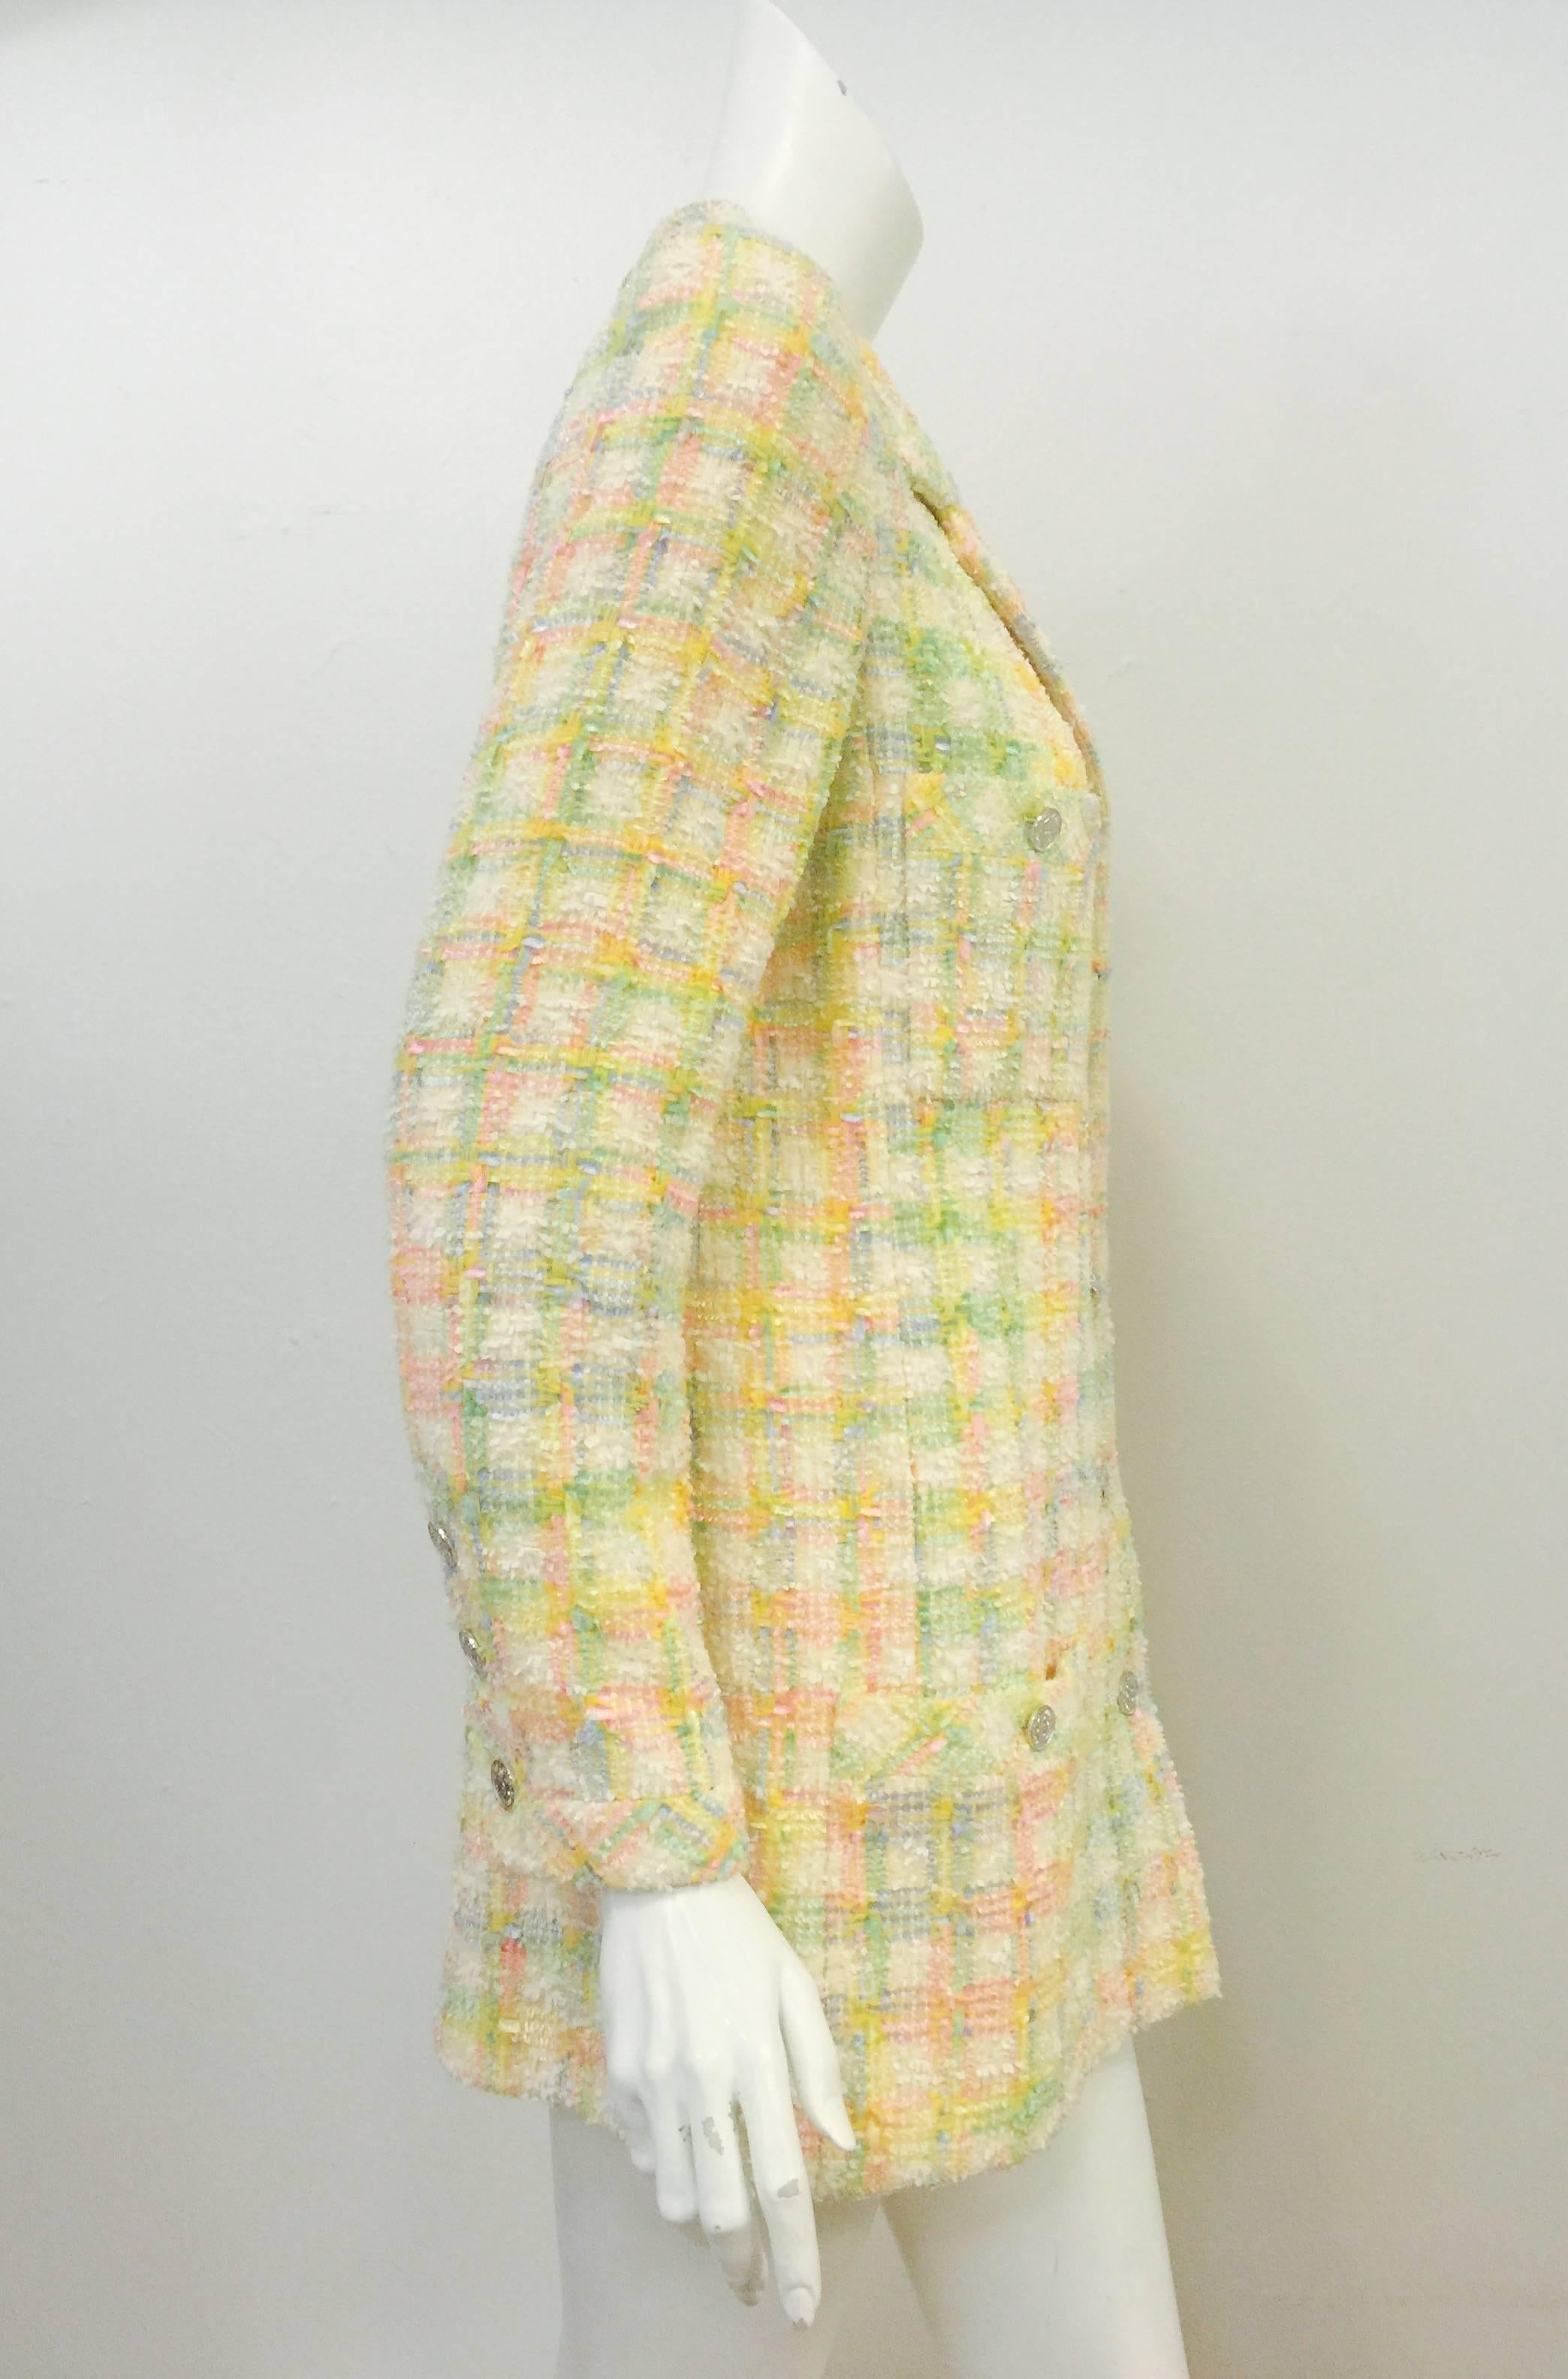 Pastel colors never looked so yummy as when combined in this spectacular ode to Chanel!  Primarily sunburst yellow, cornflower blue, and petal pink, Chanel Wool Blend Tweed Jacket features comfortable, yet long and tailored silhouette.  Front has